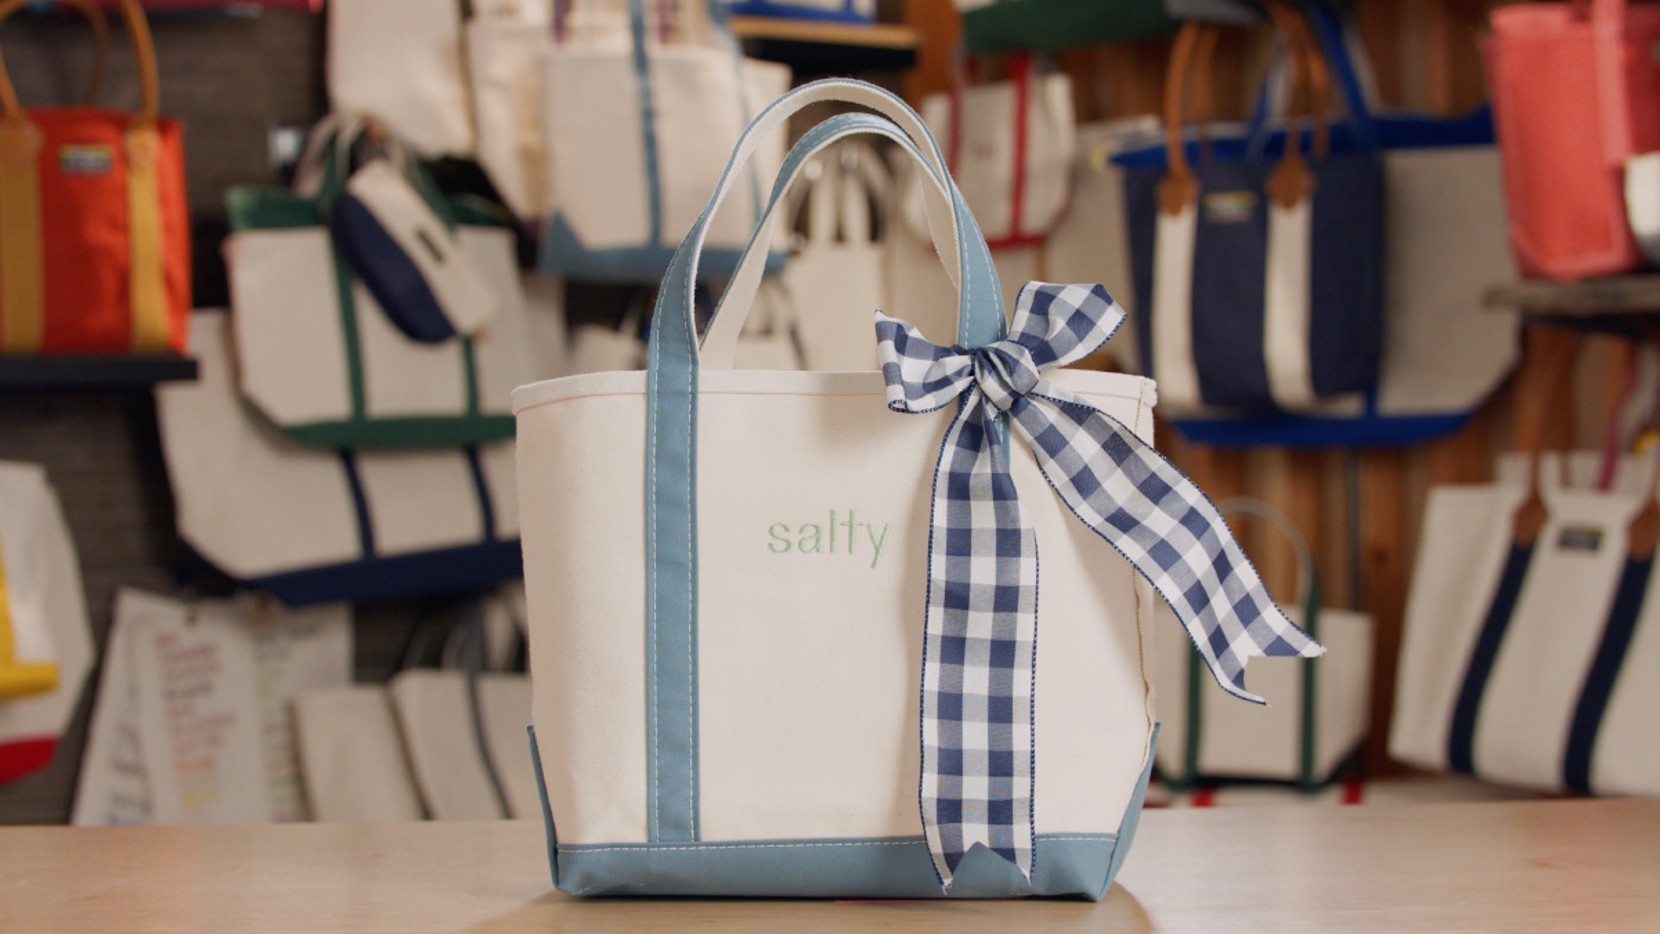 A Boat & Tote with light blue handles and a light blue monogram - "salty", a navy gingham bow tied on the handle.